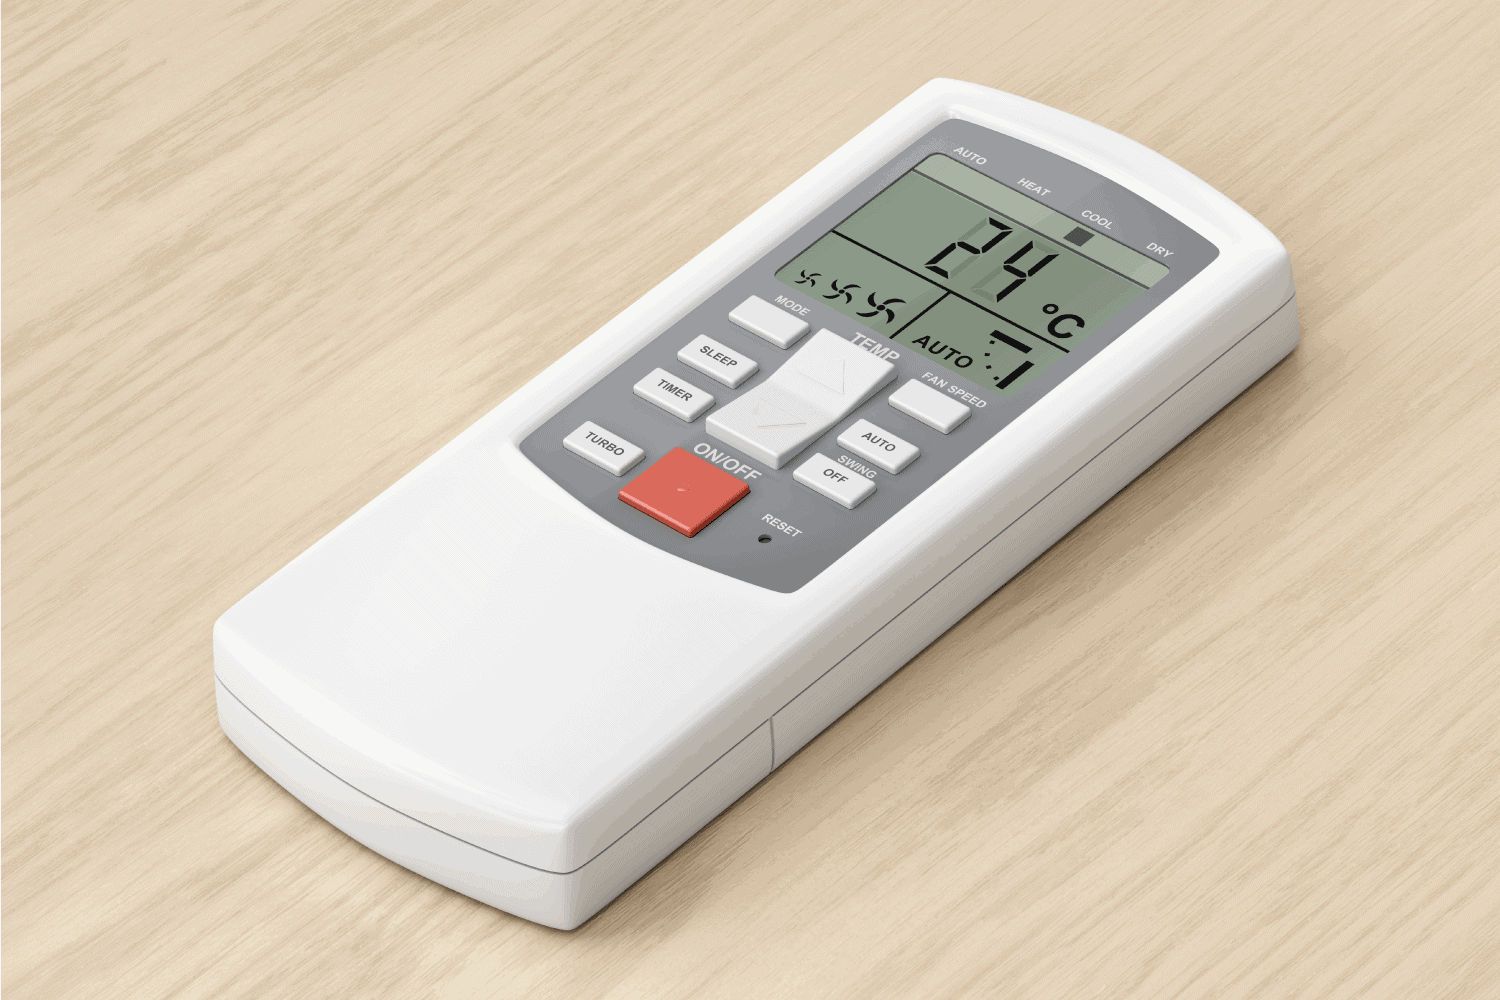 Remote control for air conditioner on wooden table